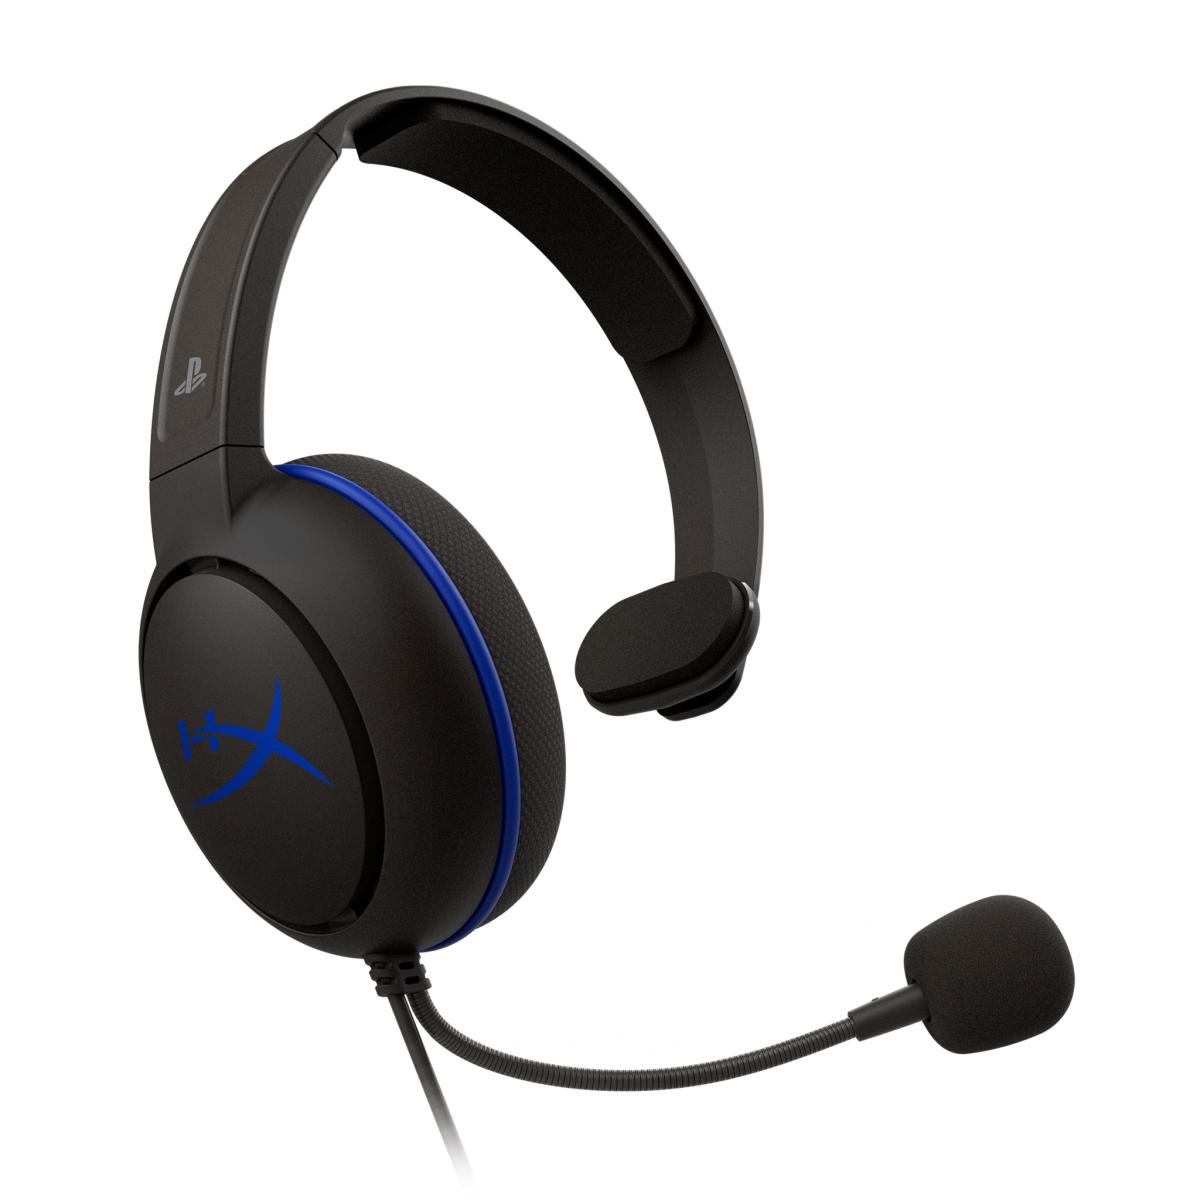 HyperX Cloud Chat Headset – Official Playstation Licensed for PS4, Noise-Cancellation Microphone in-Line Audio Controls, Lightweight, Reversible